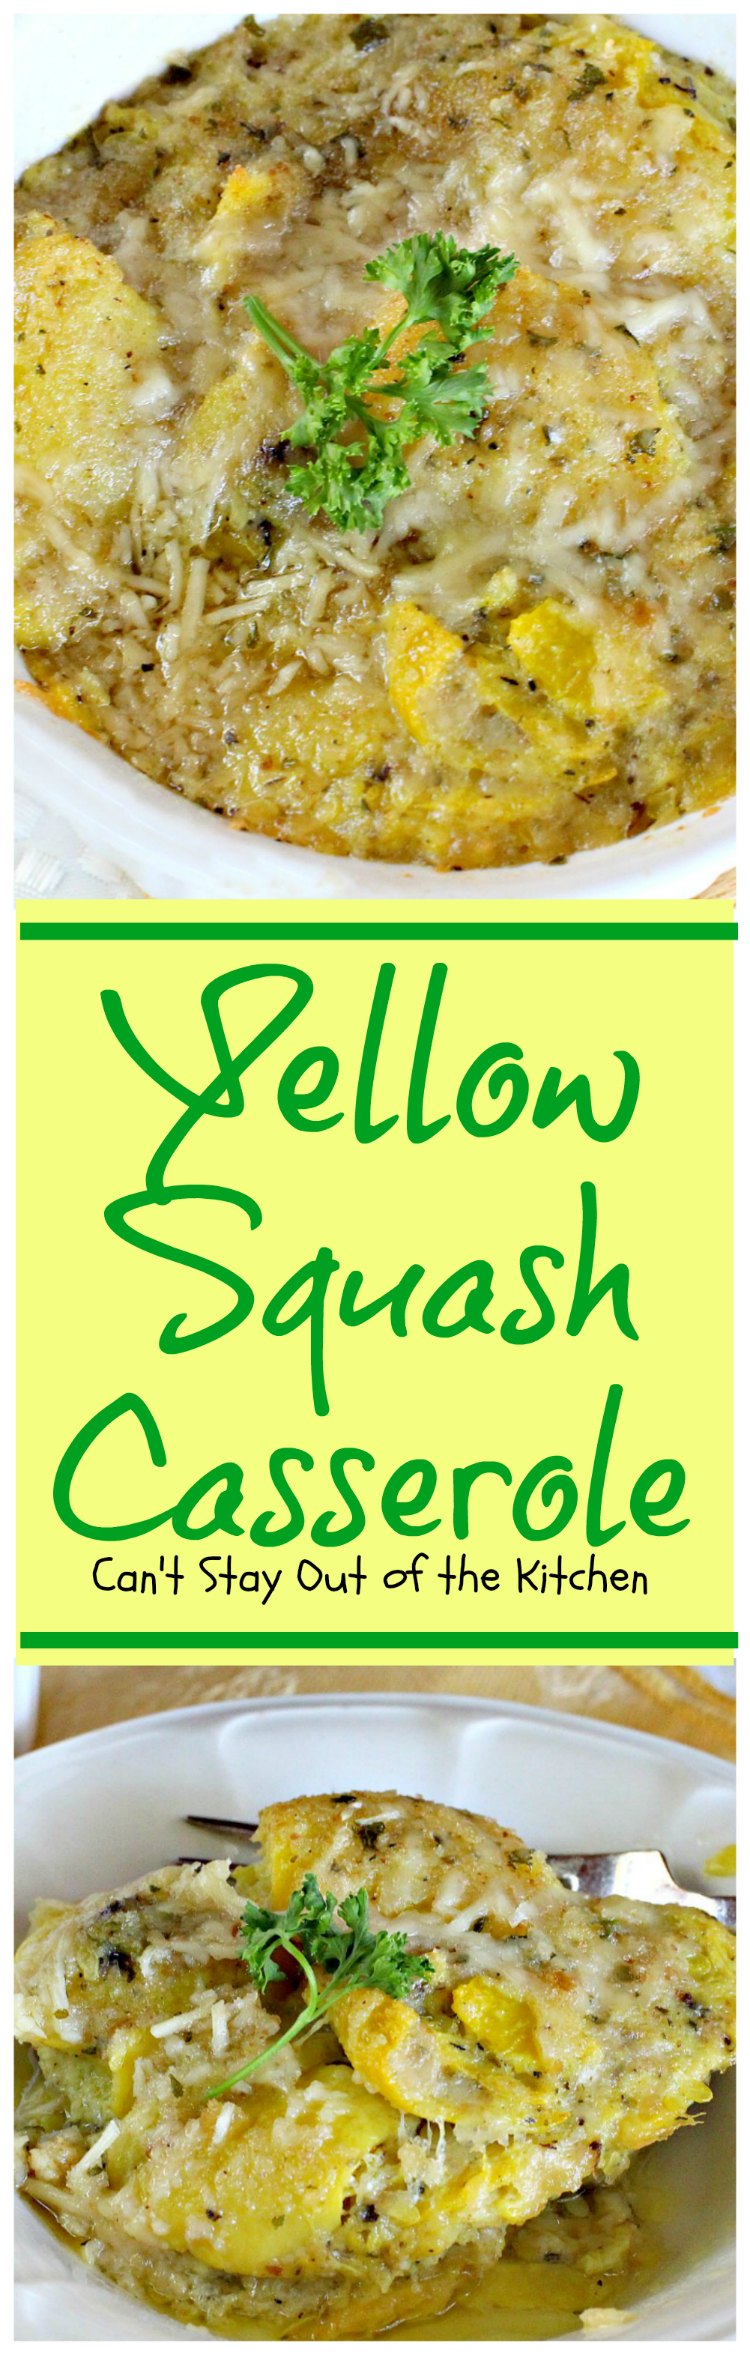 Yellow Squash Casserole | Can't Stay Out of the Kitchen | this scrumptious #casserole is perfect for #Easter dinner or other #holiday meals. #yellowsquash 